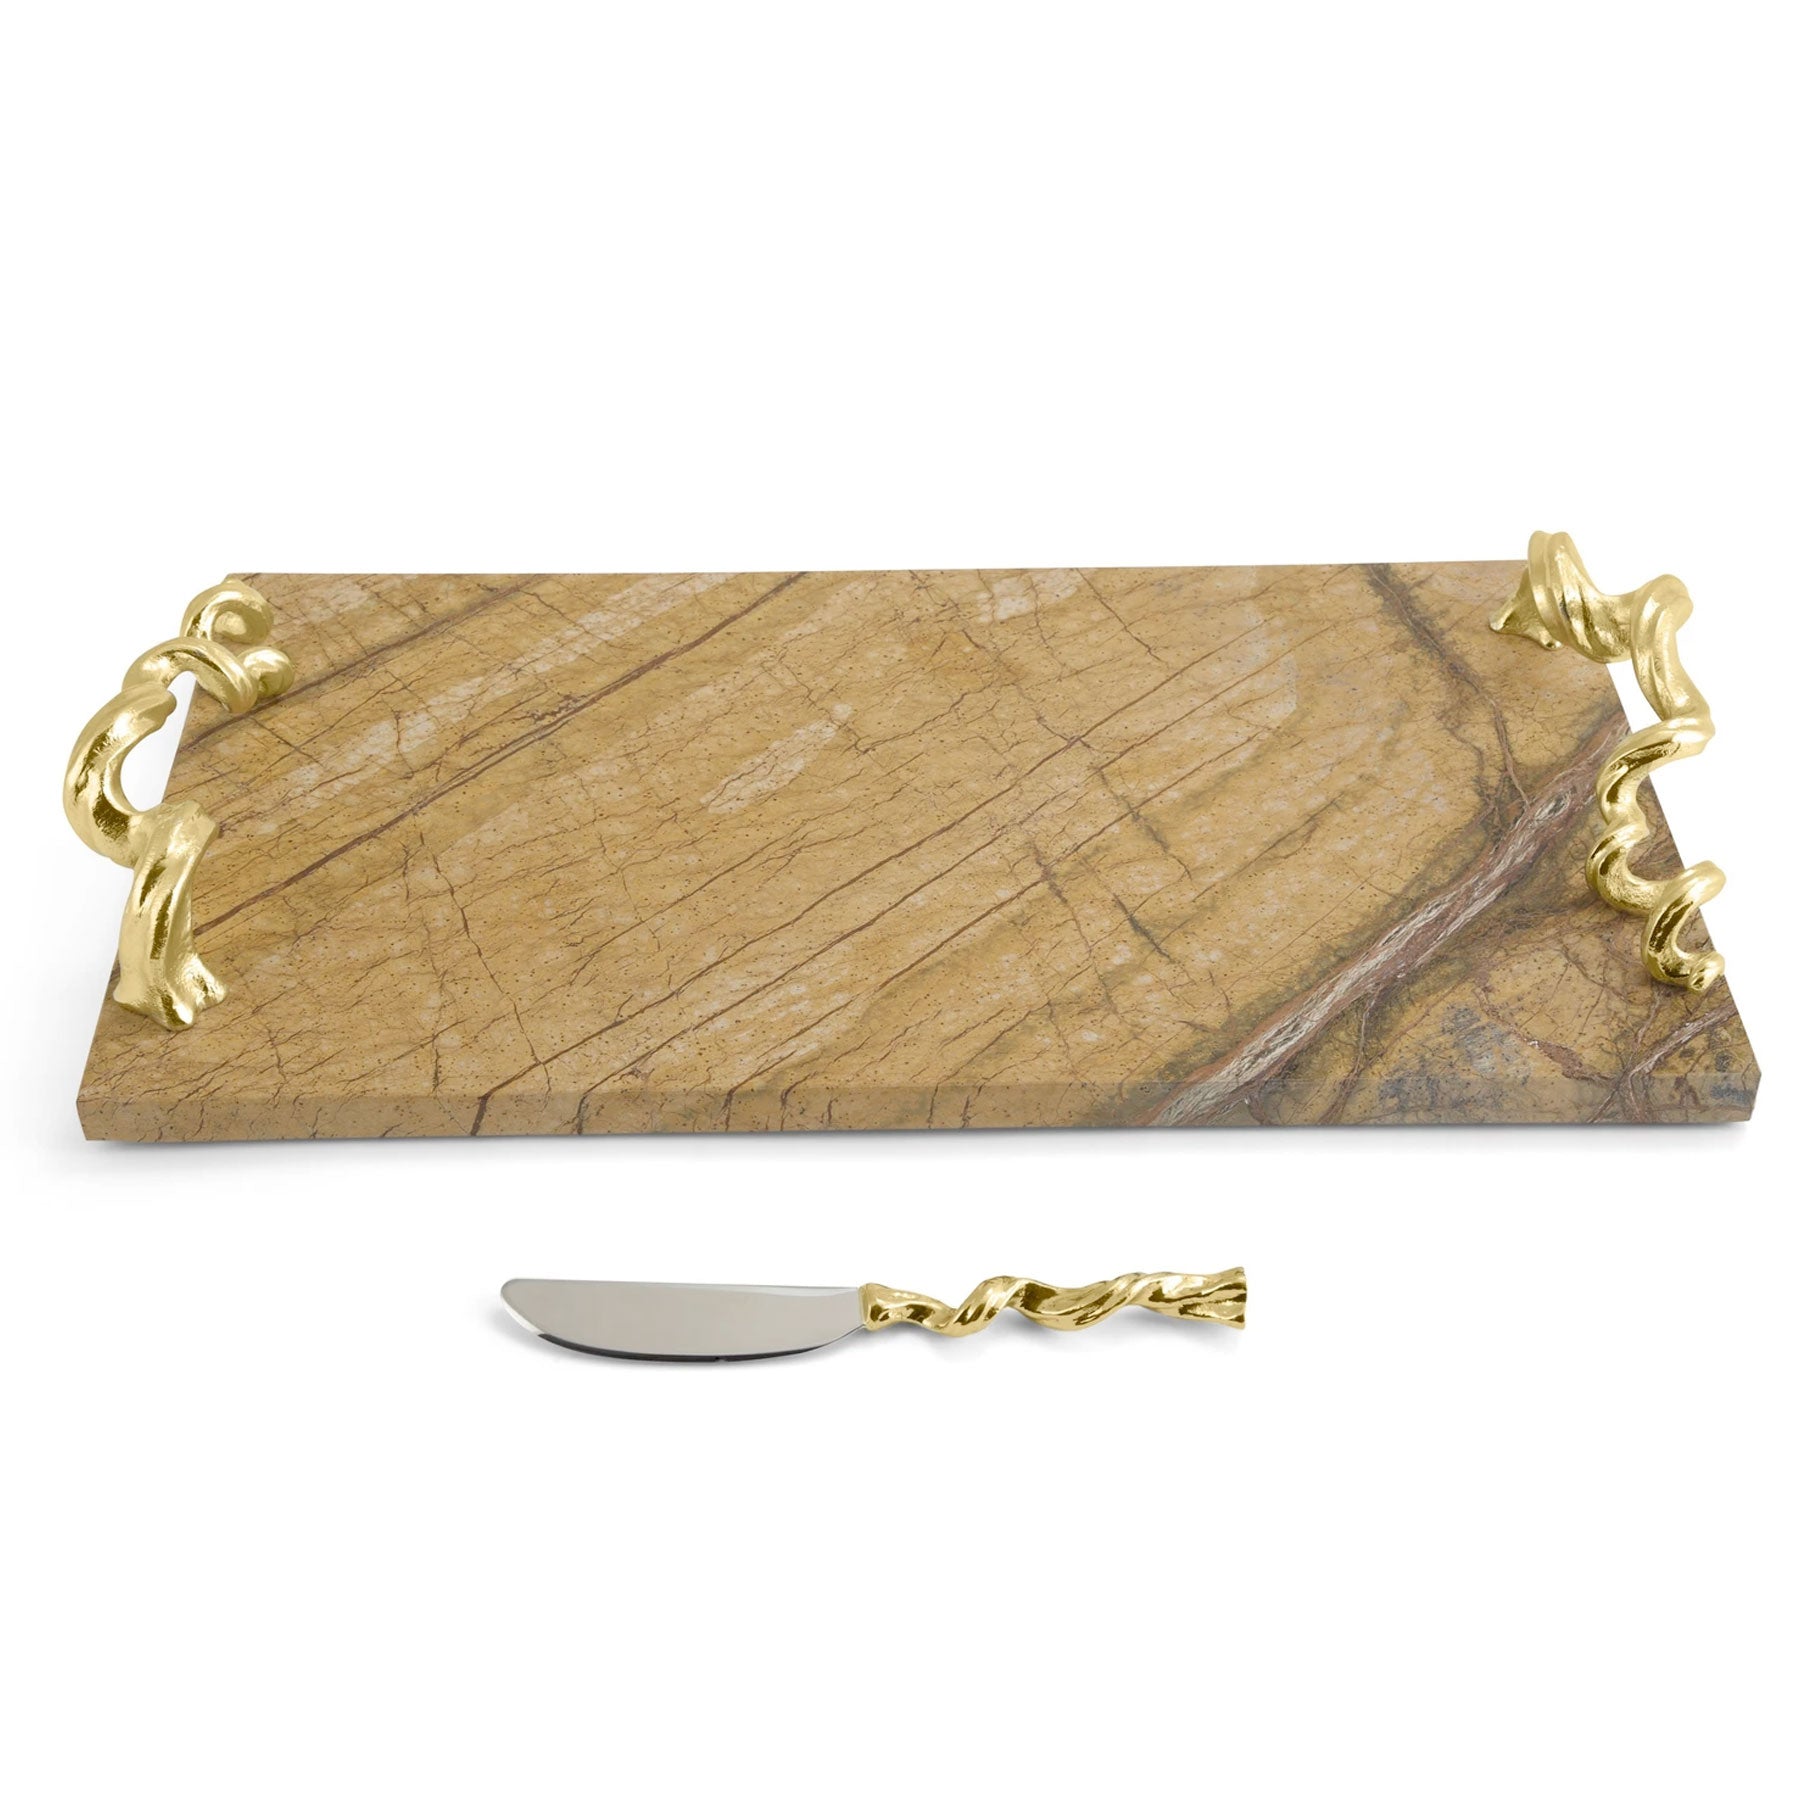 Vine Extra Large Cheese Board with Knife - RSVP Style